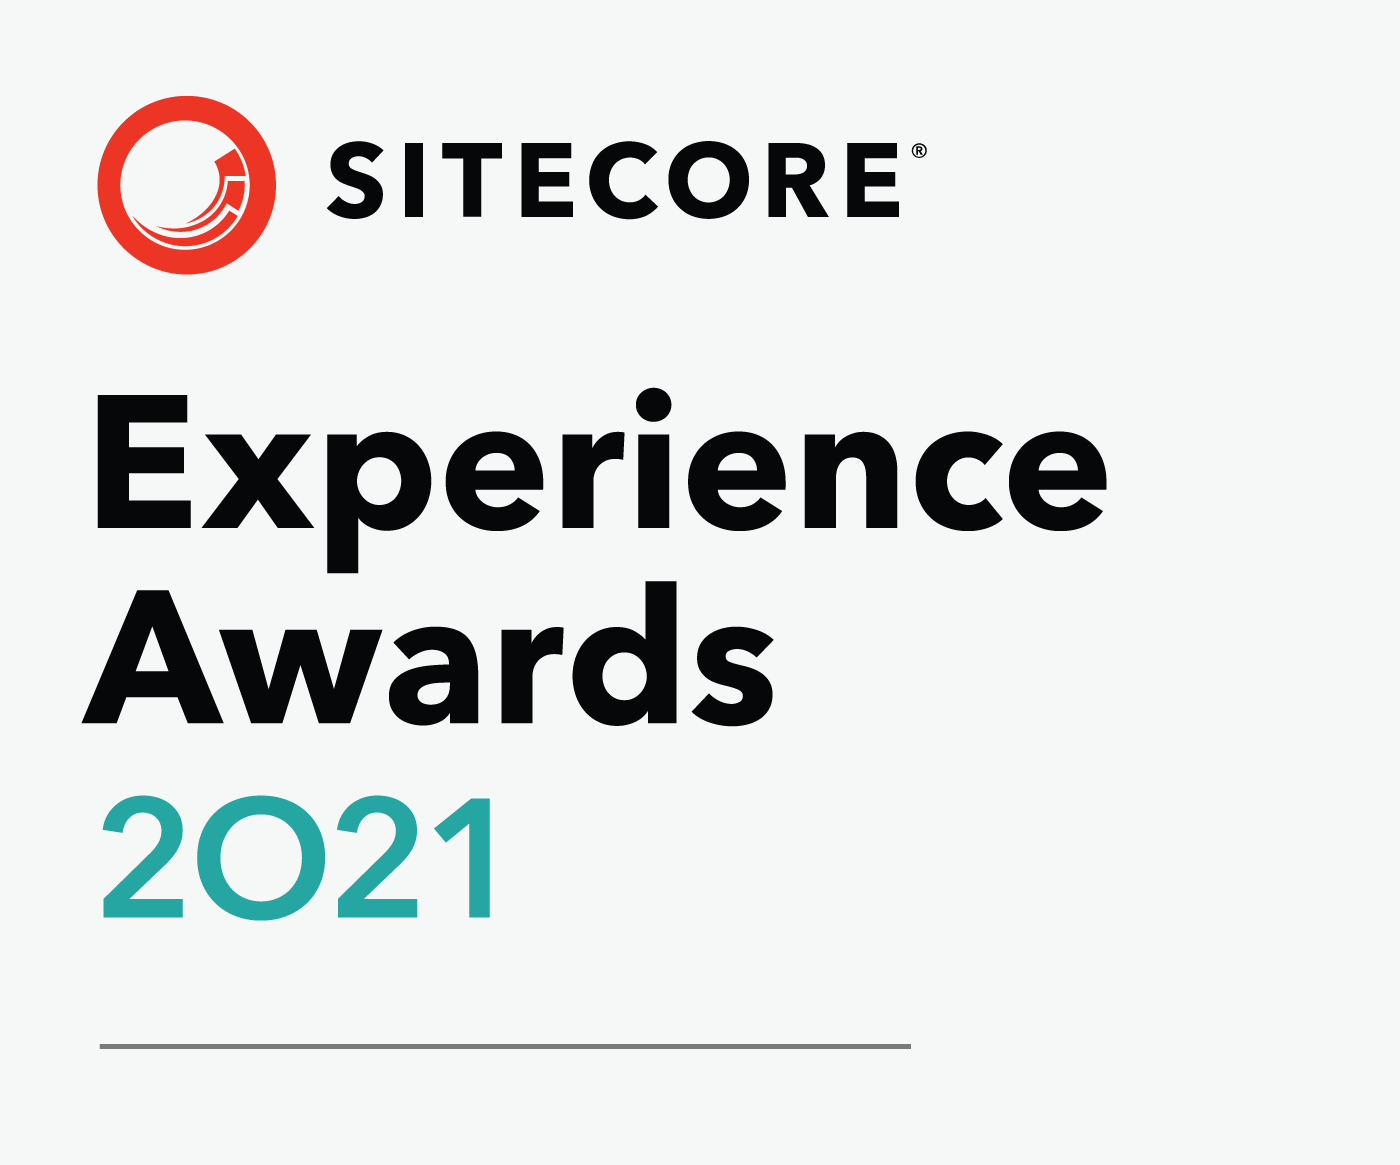 Sitecore Experience Awards 2021: Best Digital Experience Transformation with USS